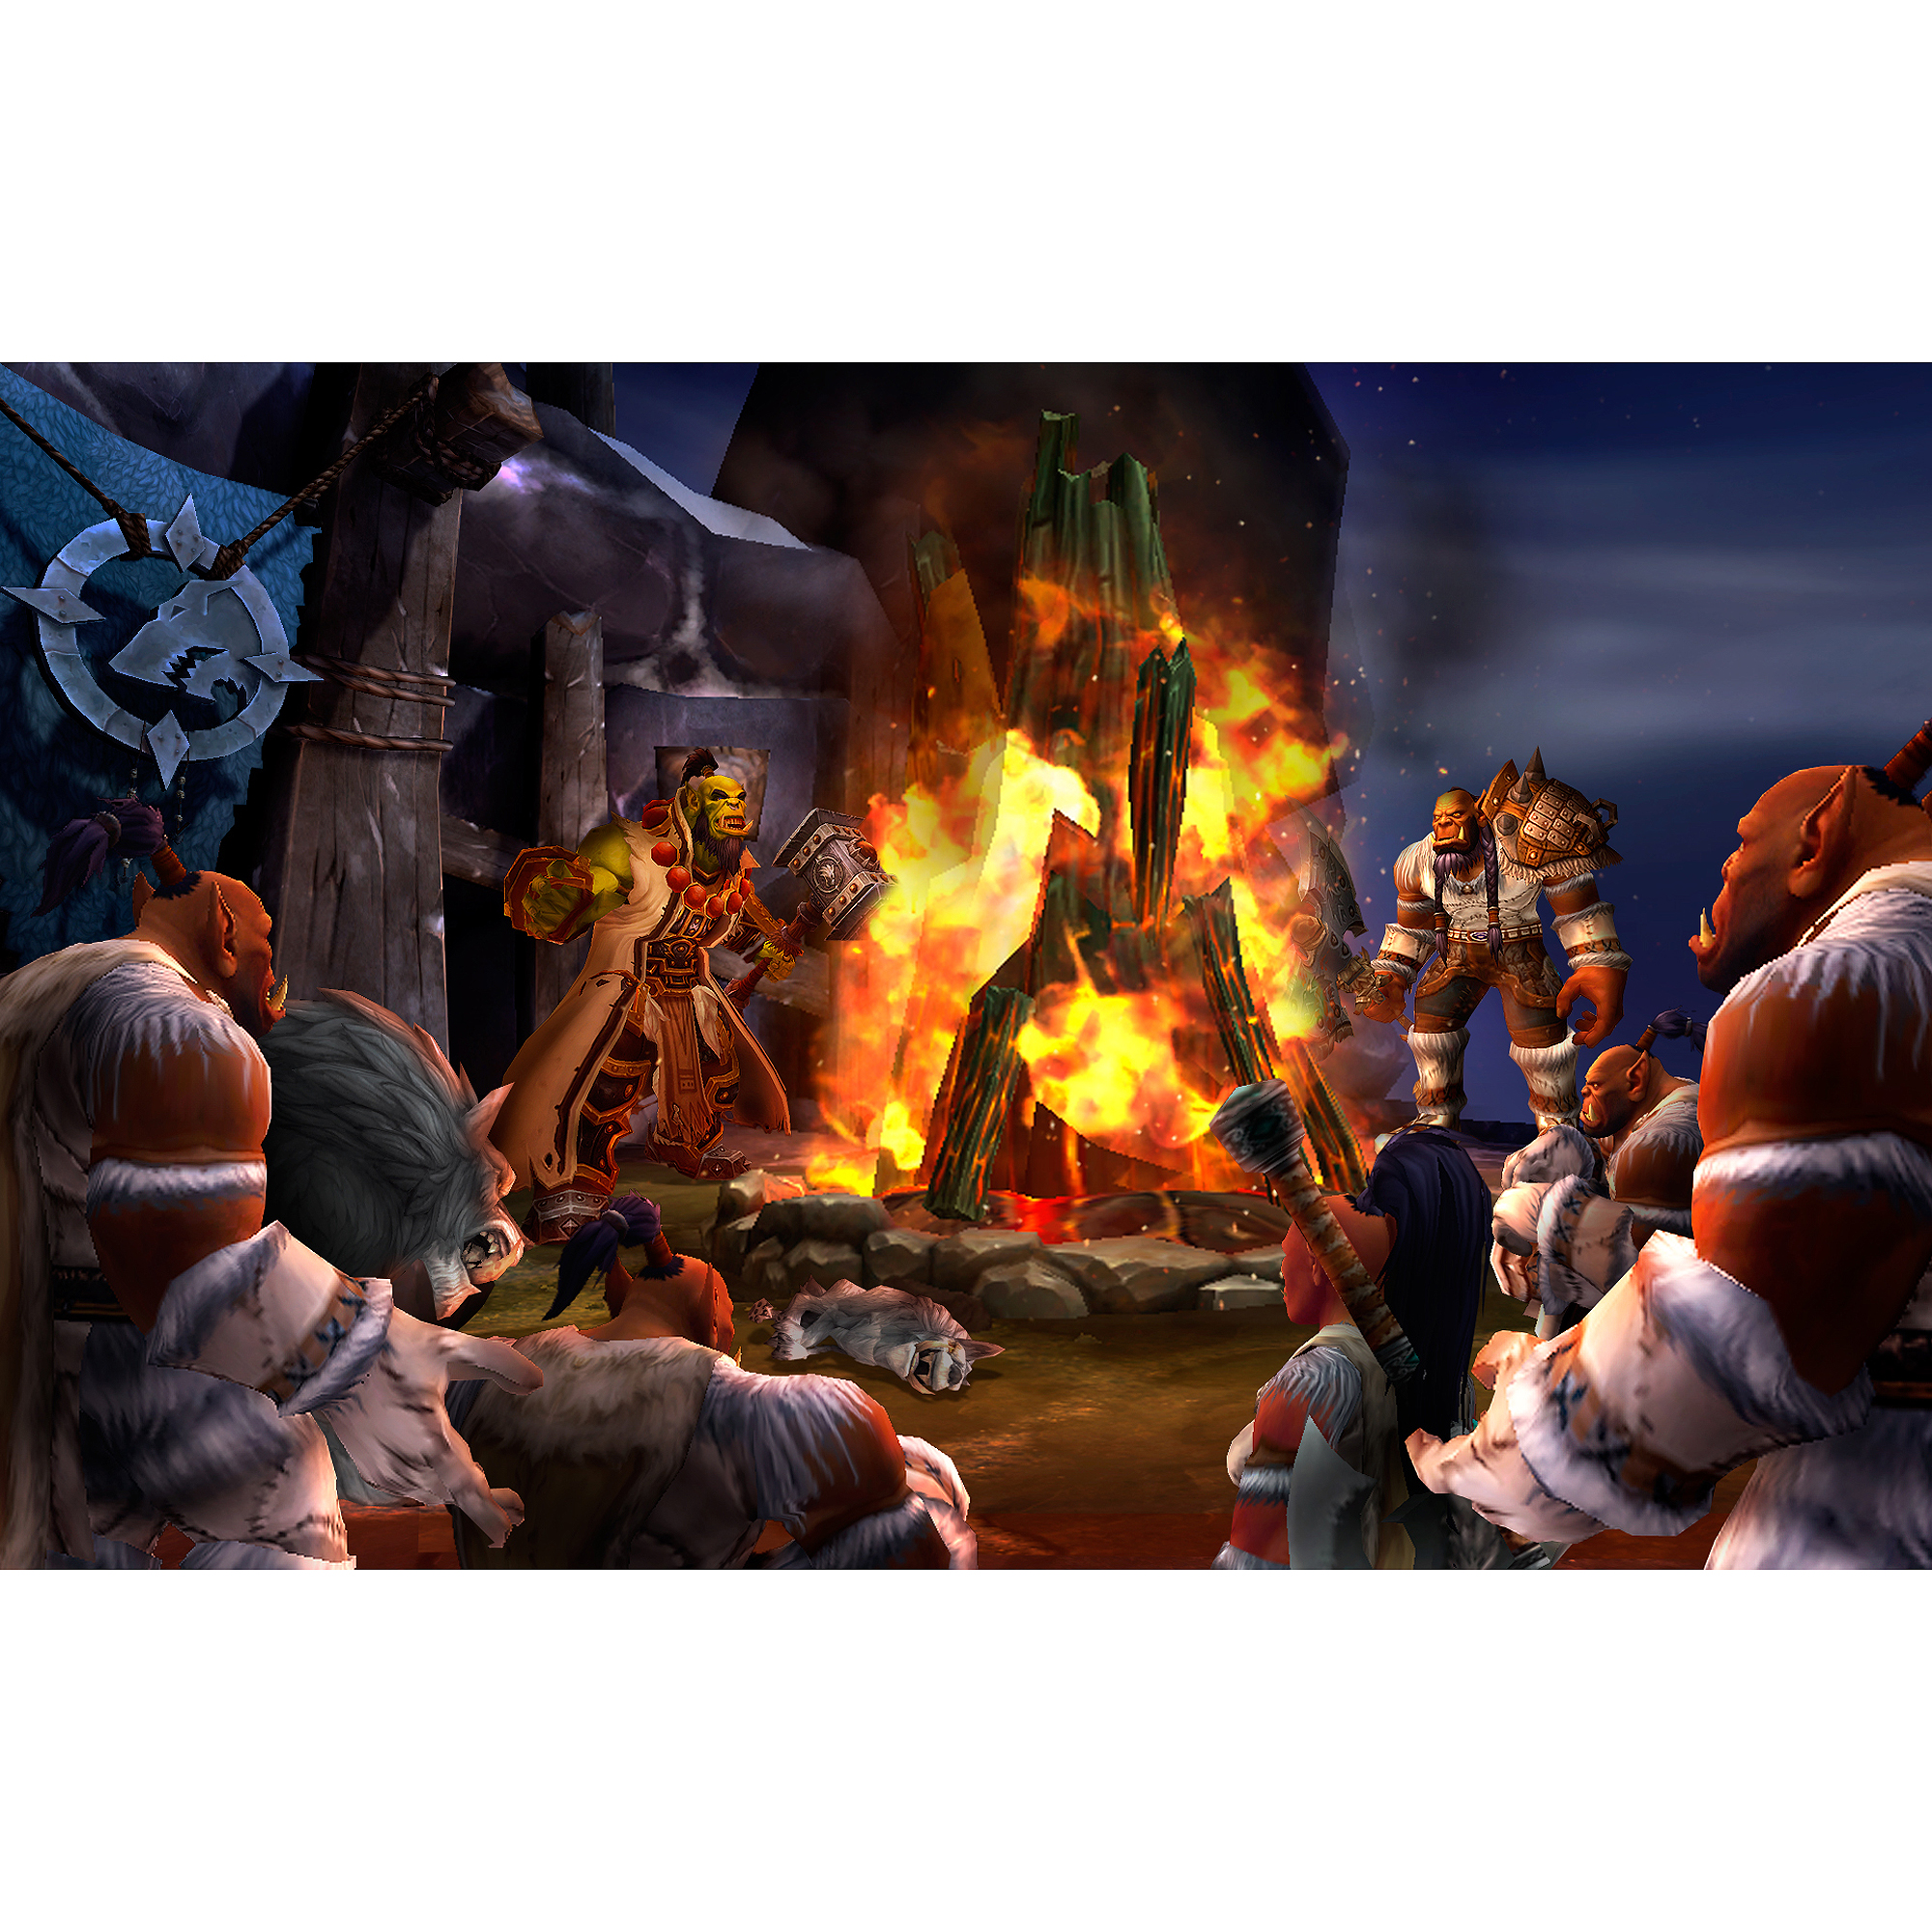 World of Warcraft Warlords of Draenor - Mac, Win - DVD - image 4 of 9